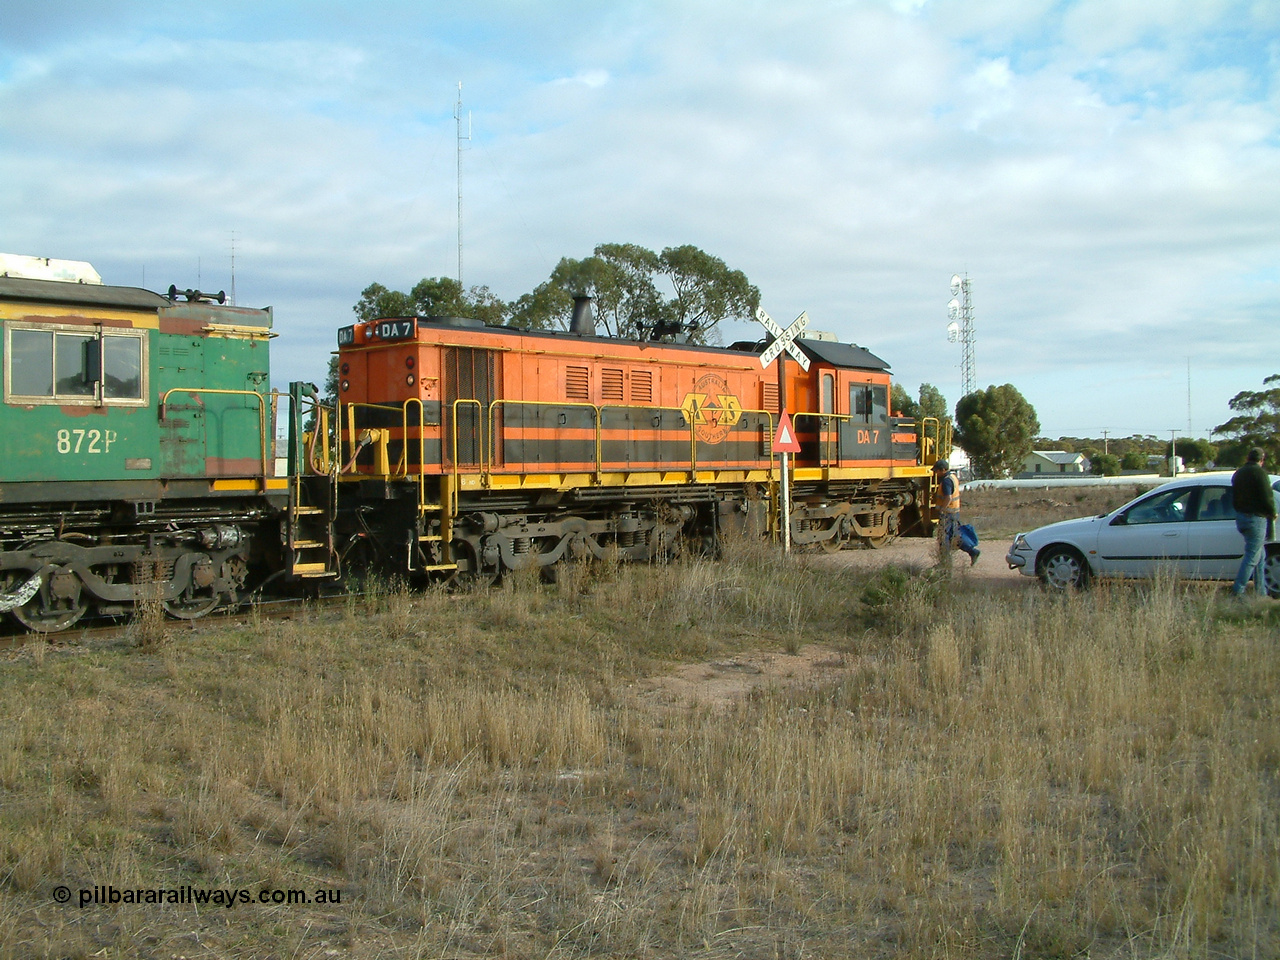 030409 080120
Warramboo, empty grain train stopped for a crew change. Rebuild unit DA 7 in Australian Southern orange and black livery shows its original heritage body style of an NSWGR 48 class 4813 AE Goodwin ALCo model DL531 serial 83713, rebuilt by Islington Workshops SA with long hood and parts from former 830 class 870 AE Goodwin ALCo model DL531 serial G6016-06 in 1998.
Keywords: DA-class;DA7;83713;Port-Augusta-WS;ALCo;DL531G/1;48-class;4813;rebuild;